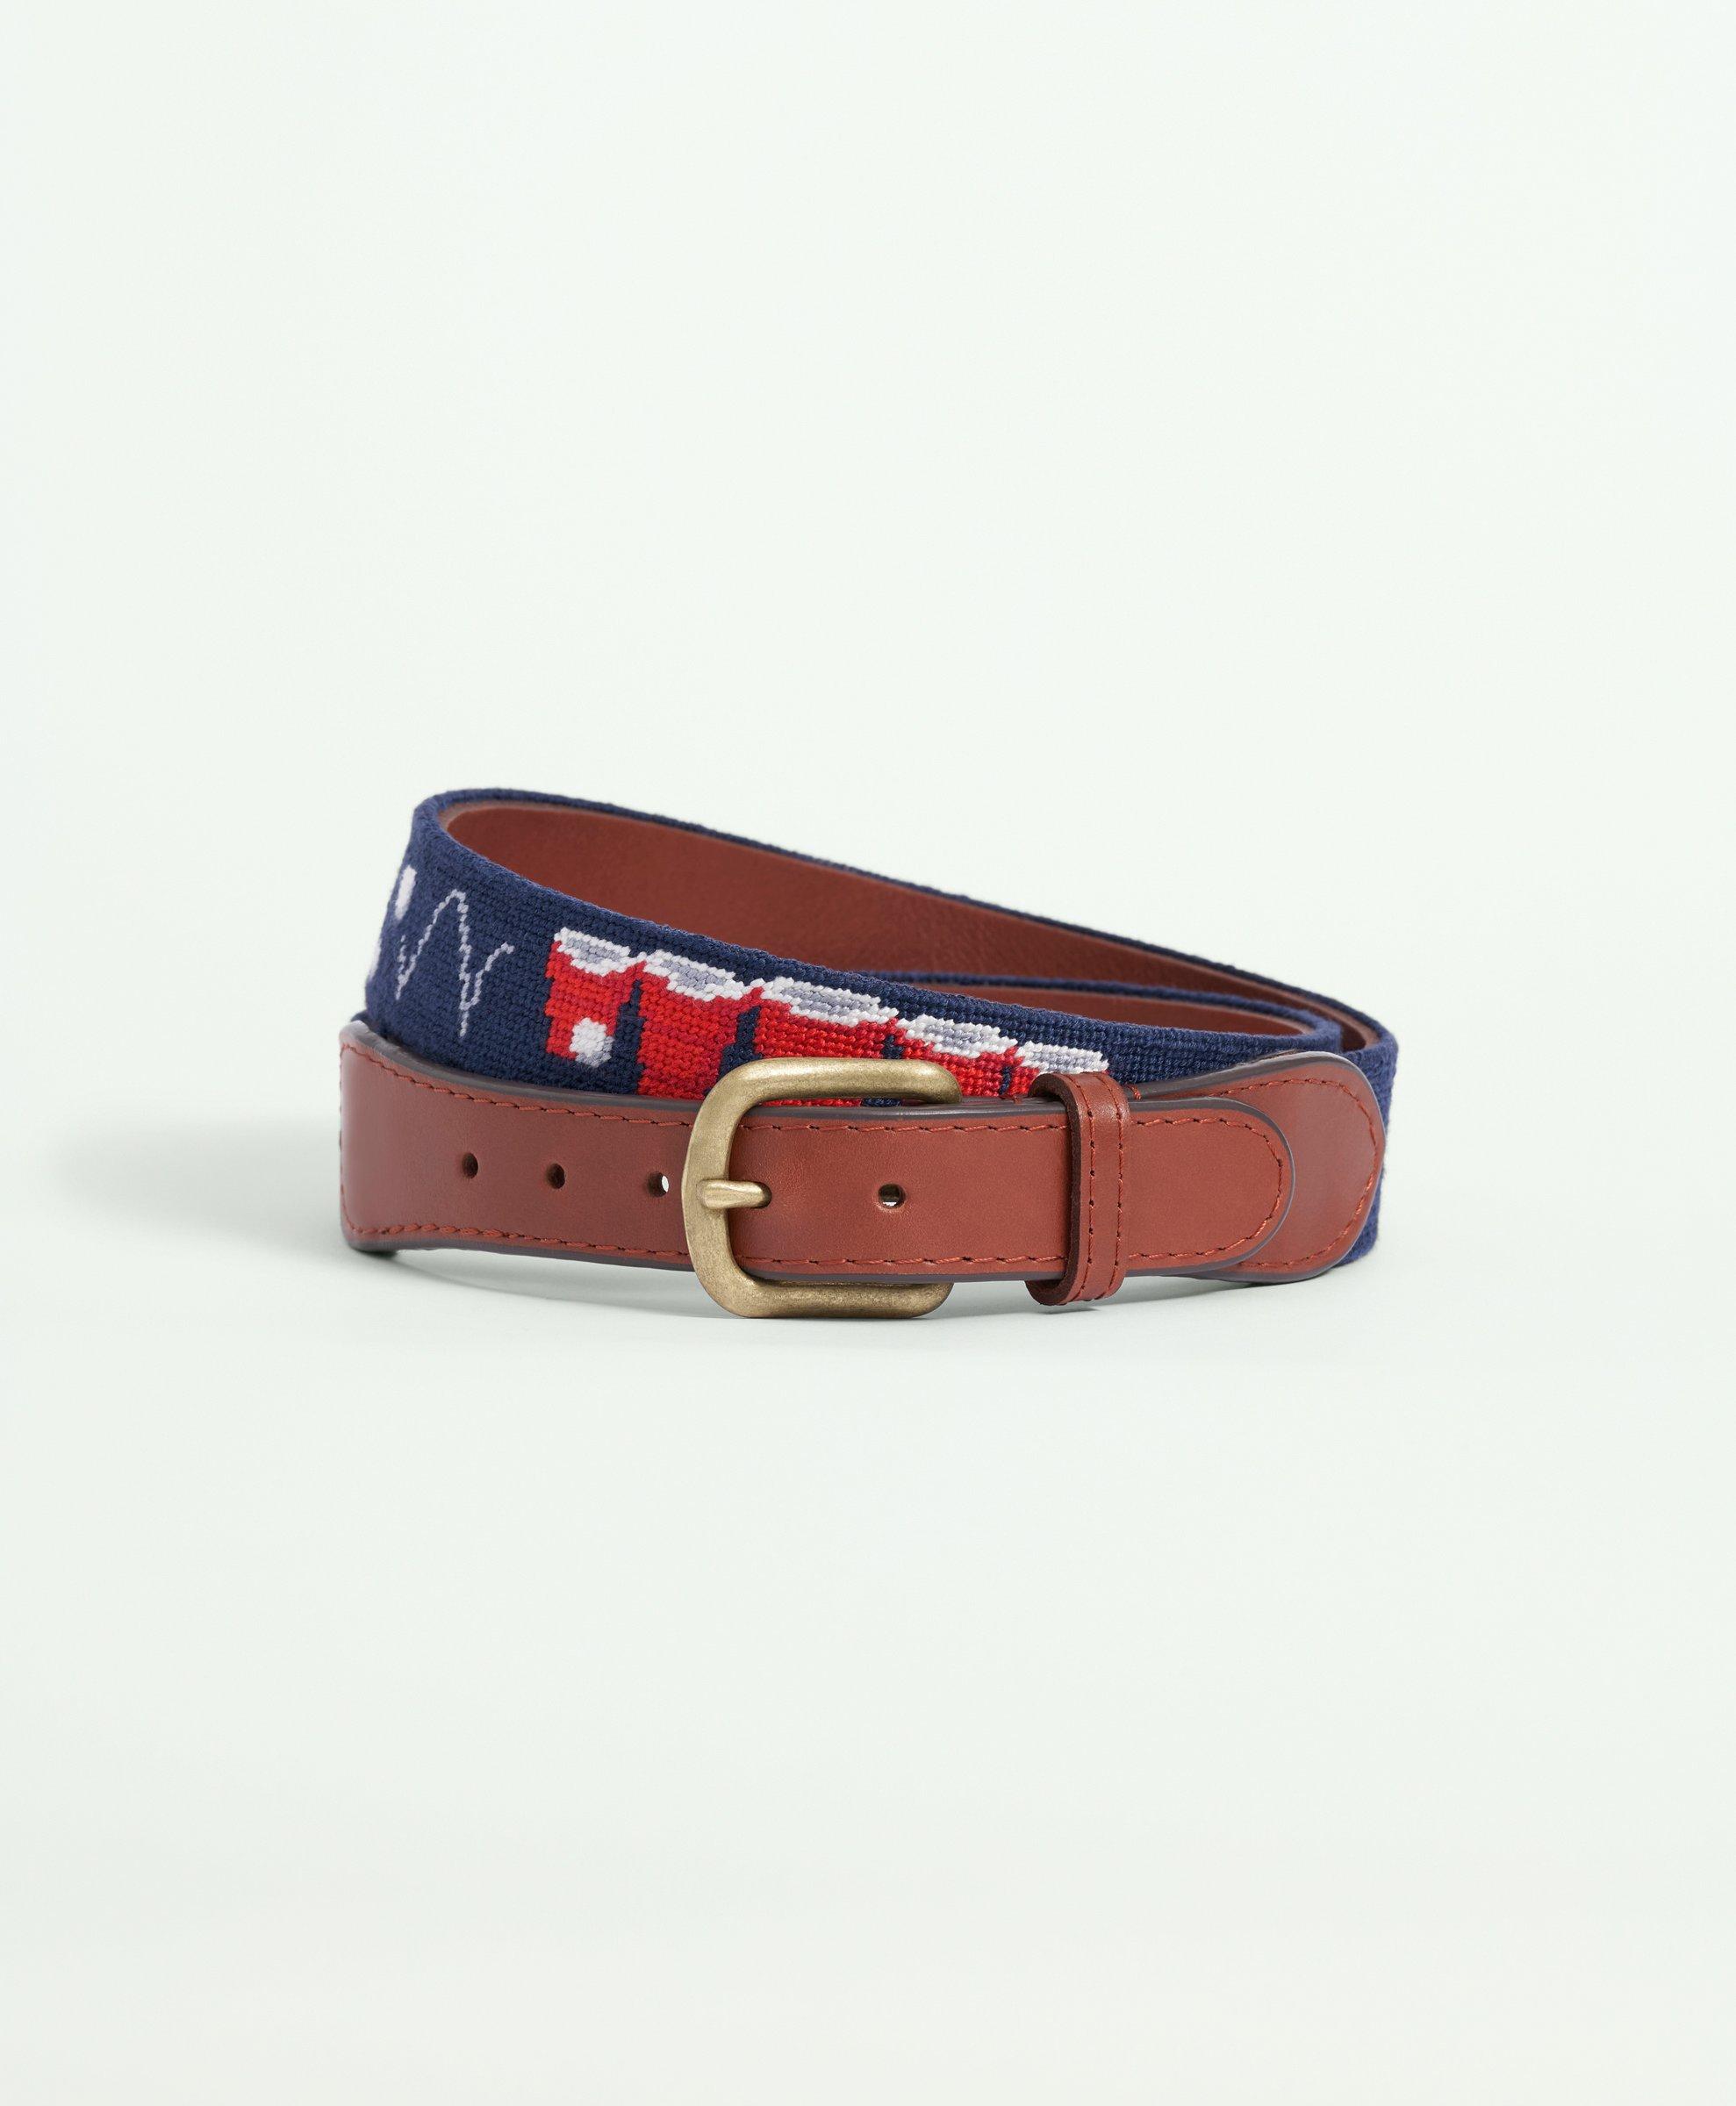 Brooks Brothers Smathers & Branson Needlepoint Belt | Size 36 In Multicolor